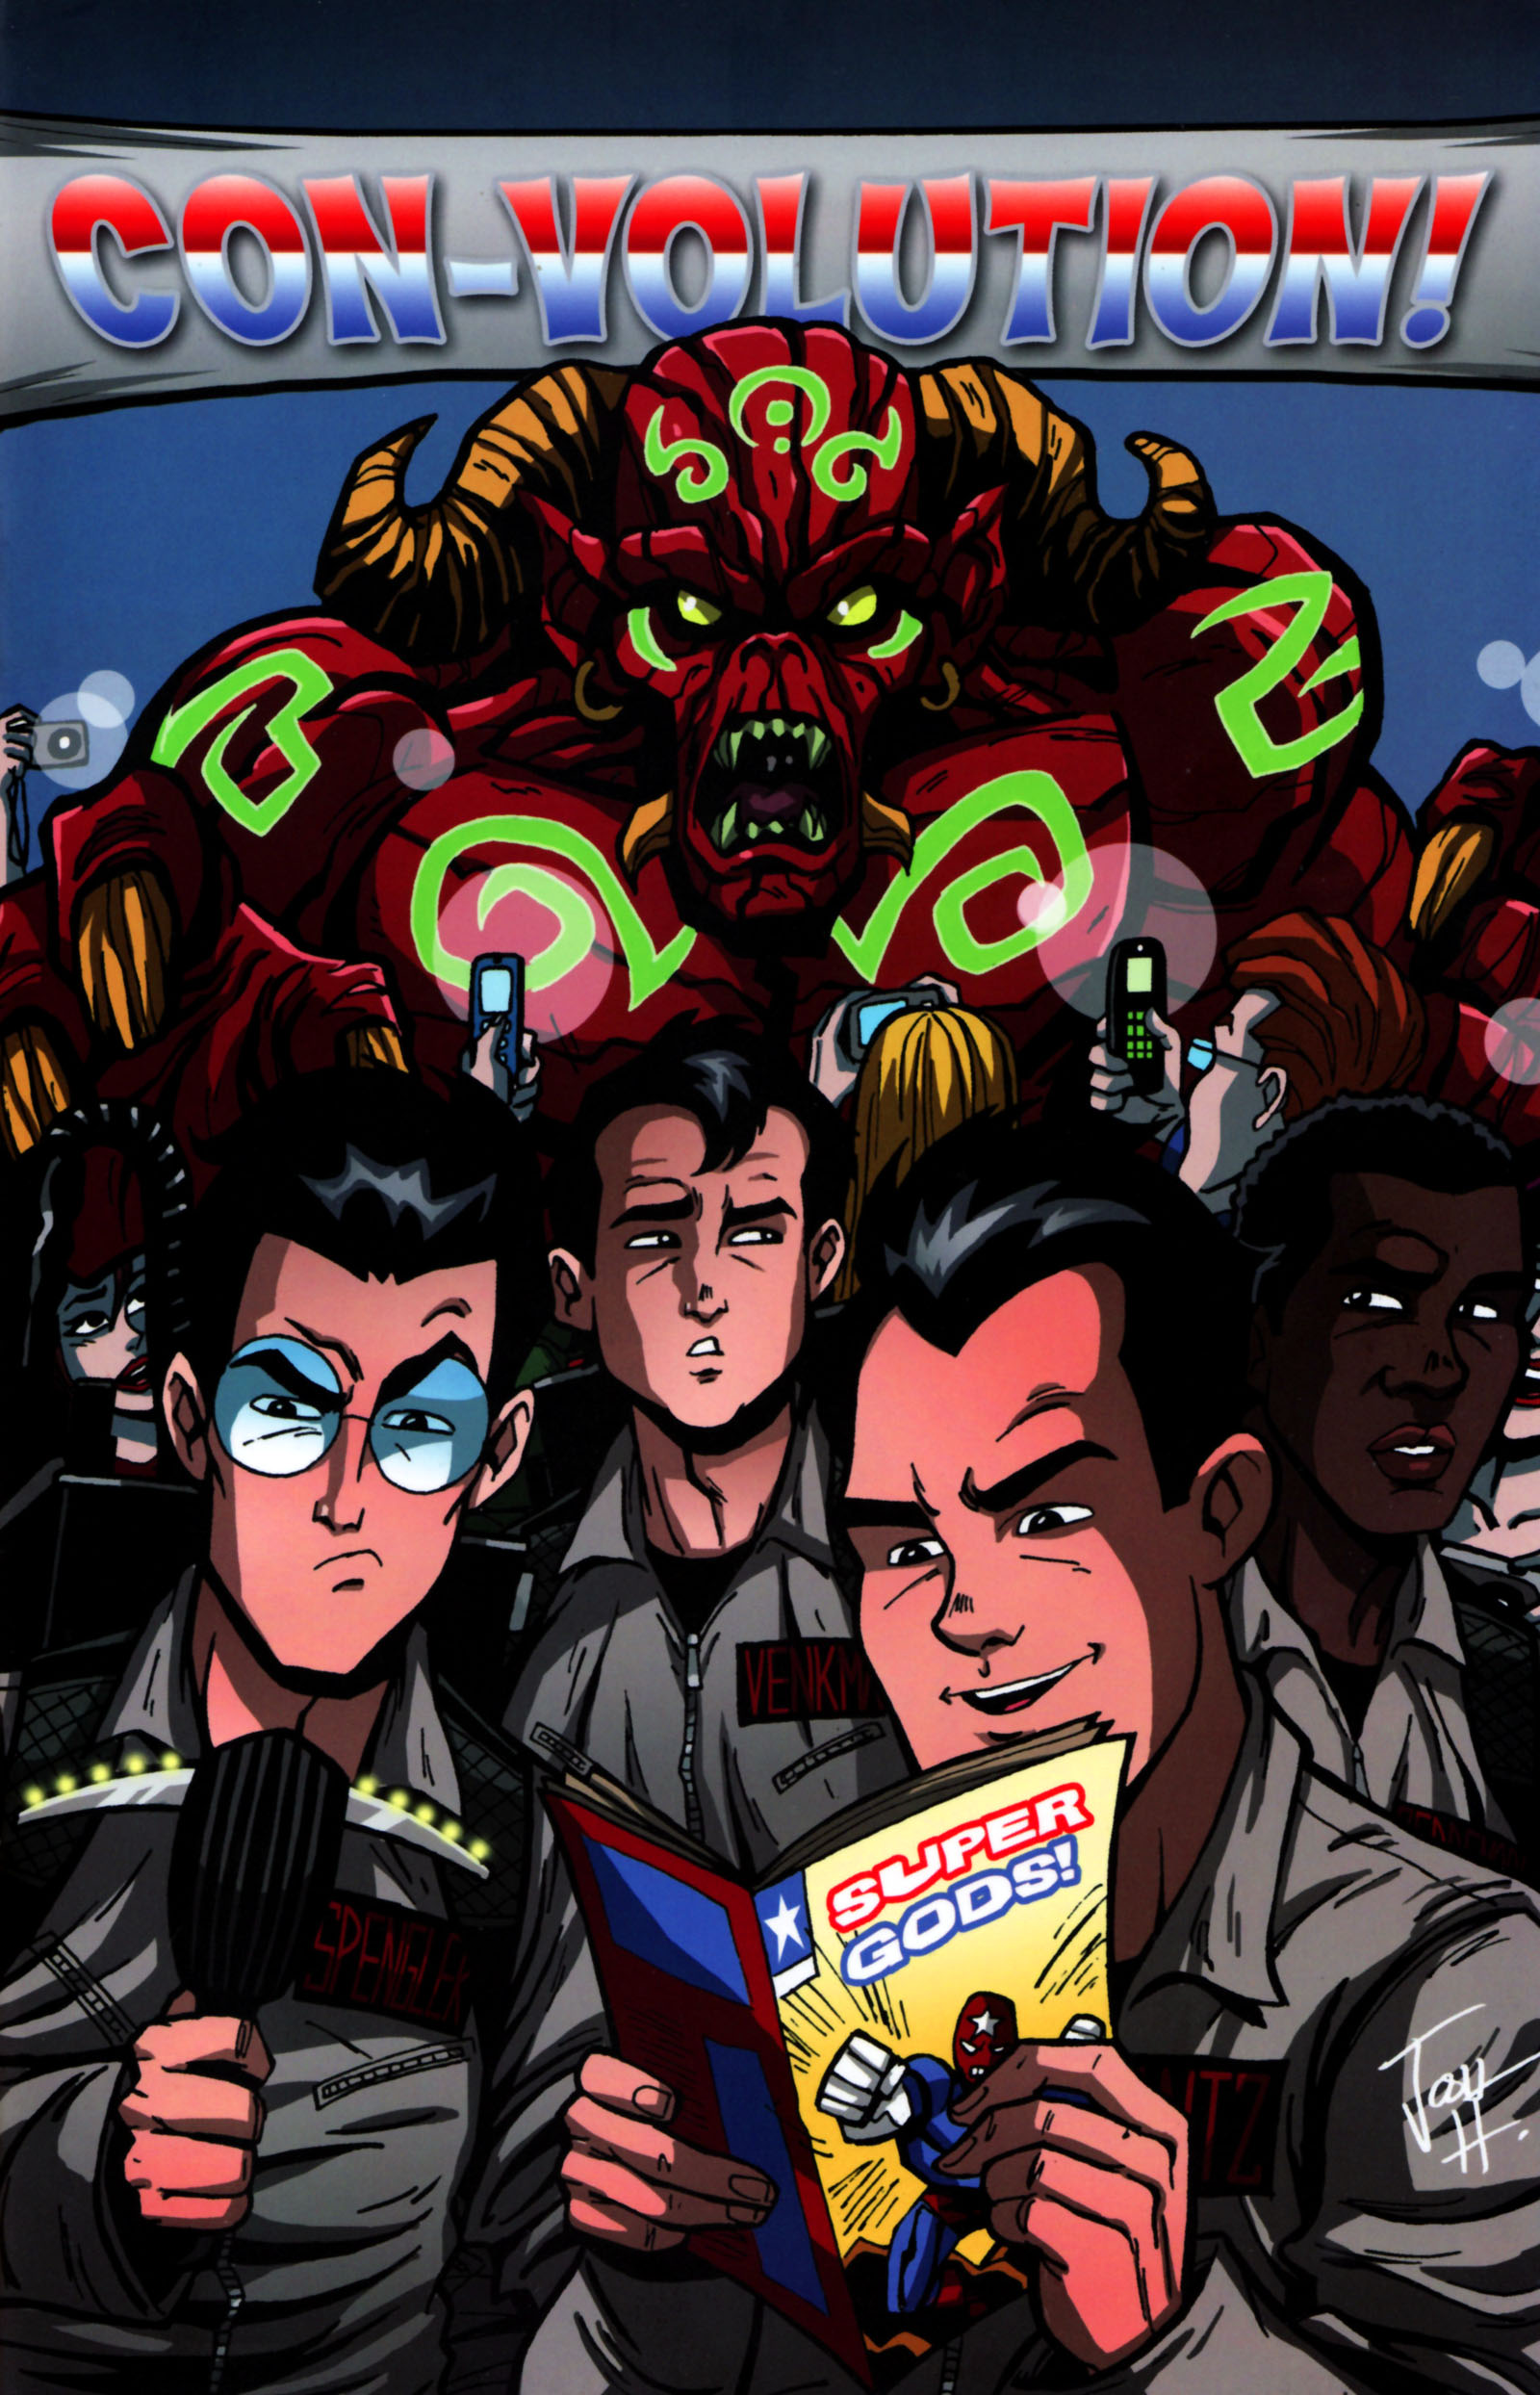 Read online Ghostbusters: Con-Volution comic -  Issue # Full - 3